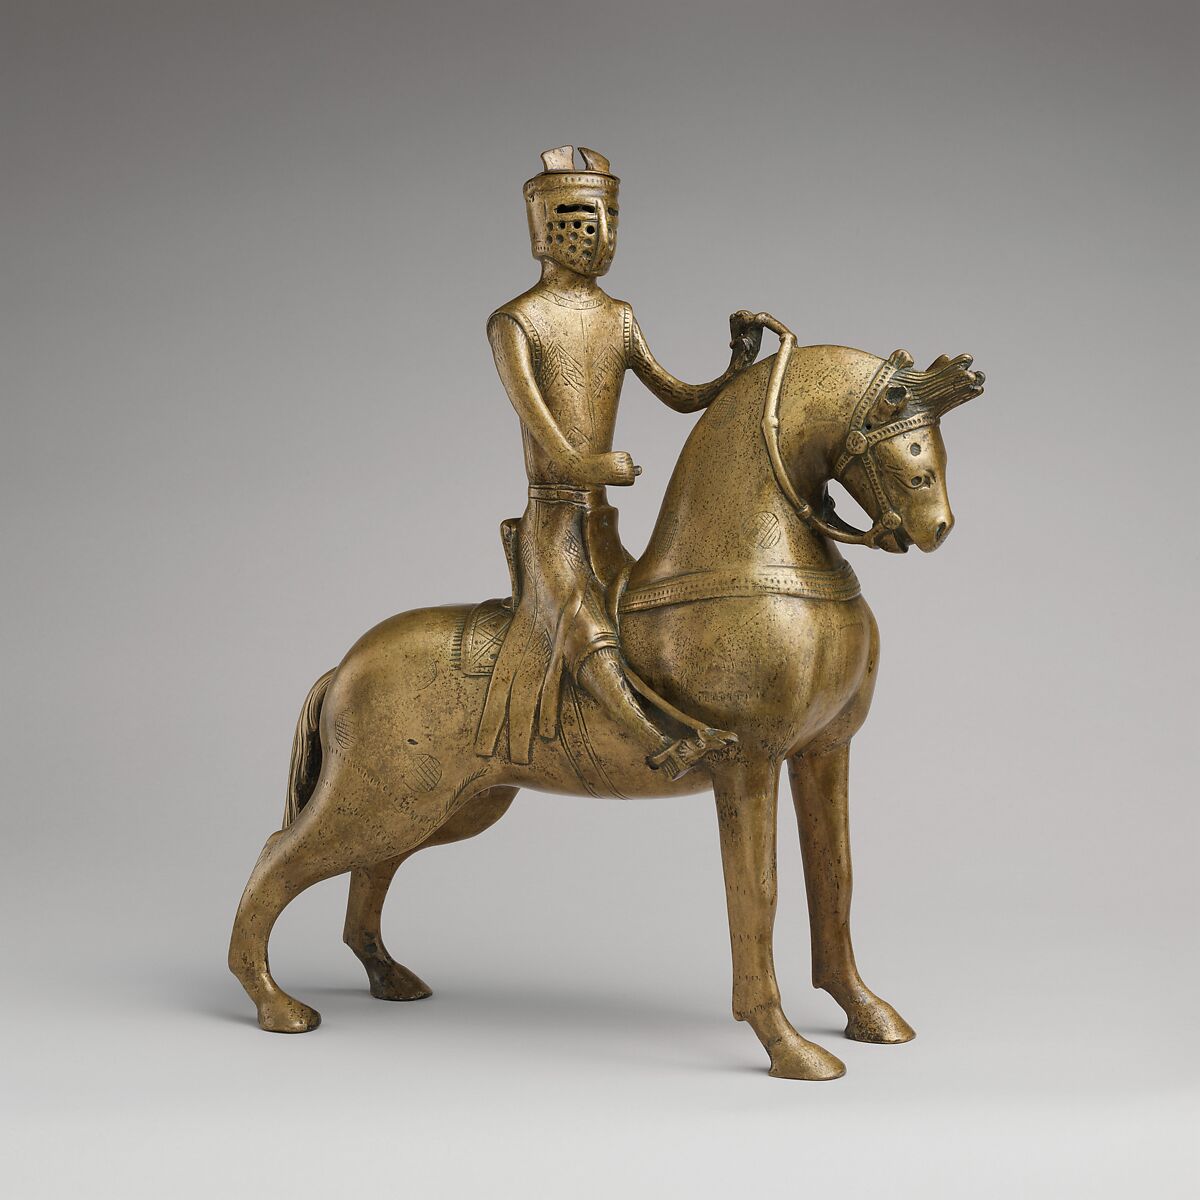 Aquamanile in the Form of a Mounted Knight